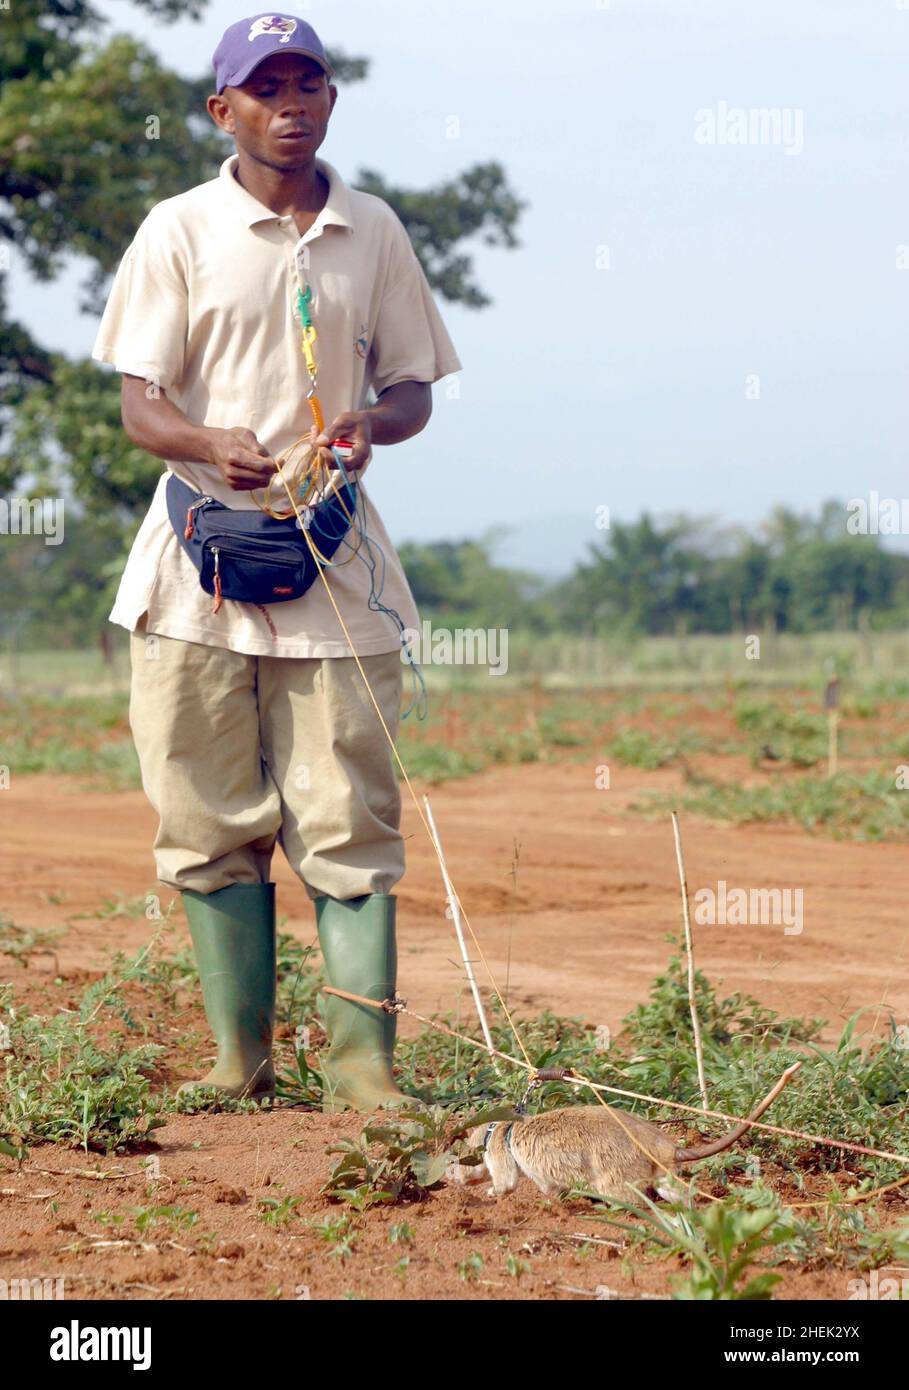 A  RAT RETURNS FOR ITS REWARD AFTER IDENTIFYING A LANDMINE IN A SIMULATED MINEFIELD WHILST TETHERED TO A GUIDE ROPE AND LEASH AND GUIDED BY ITS HANDLER AT THE APOPO TRAINING CENTRE, SOKOINE UNIVERSITY OF AGRICULTURE, MOROGORO, TANZANIA. AT THE CENTRE THE BELGIUM COMPANY (APOPO), THE BRAINCHILD OF BART WEETJENS, IS TRAINING RATS TO DETECT LANDMINES FOR USE IN WAR TORN REGIONS. Stock Photo